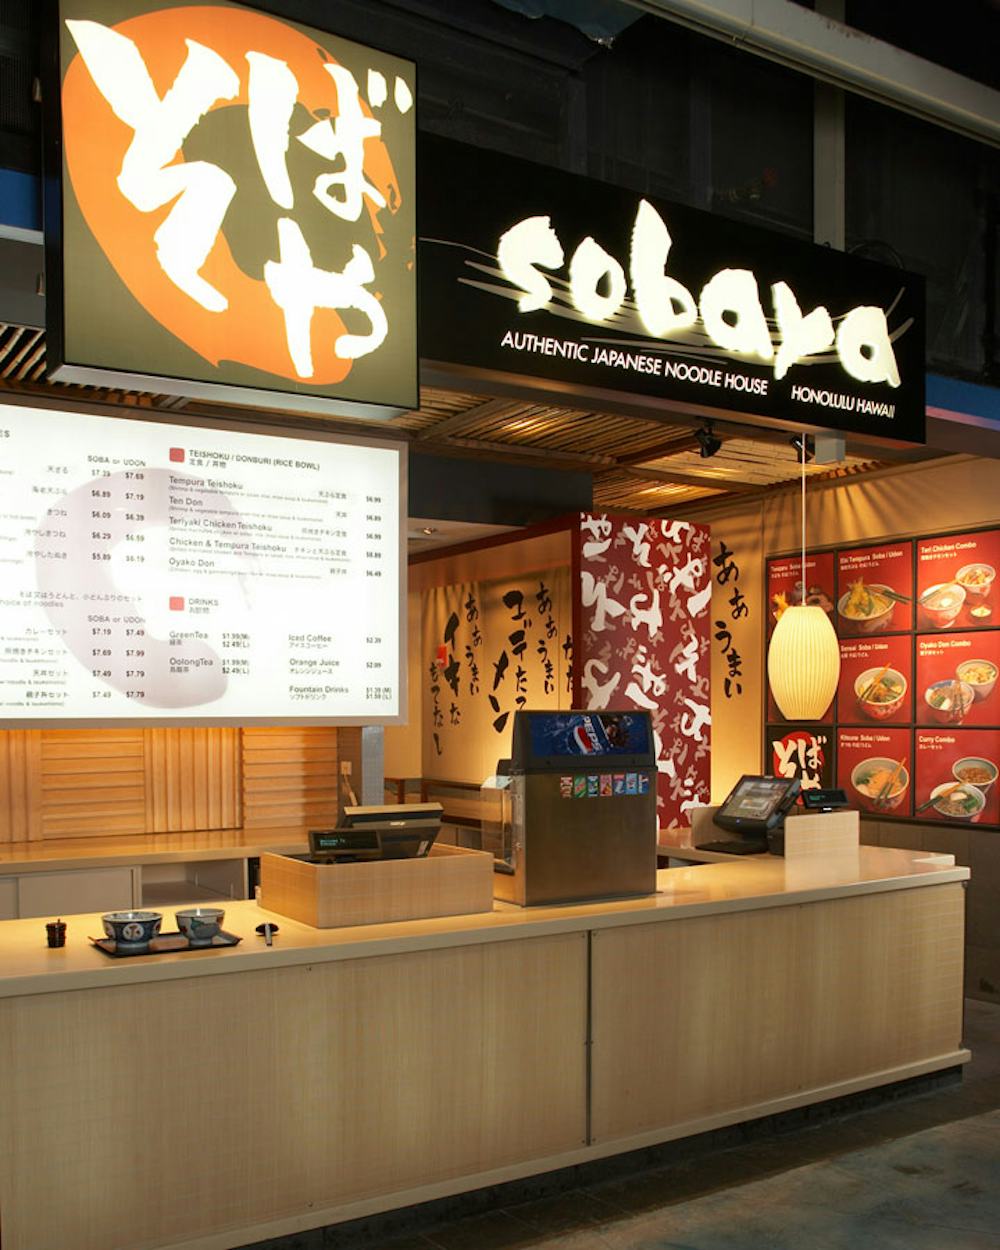 Entrance and ordering area.